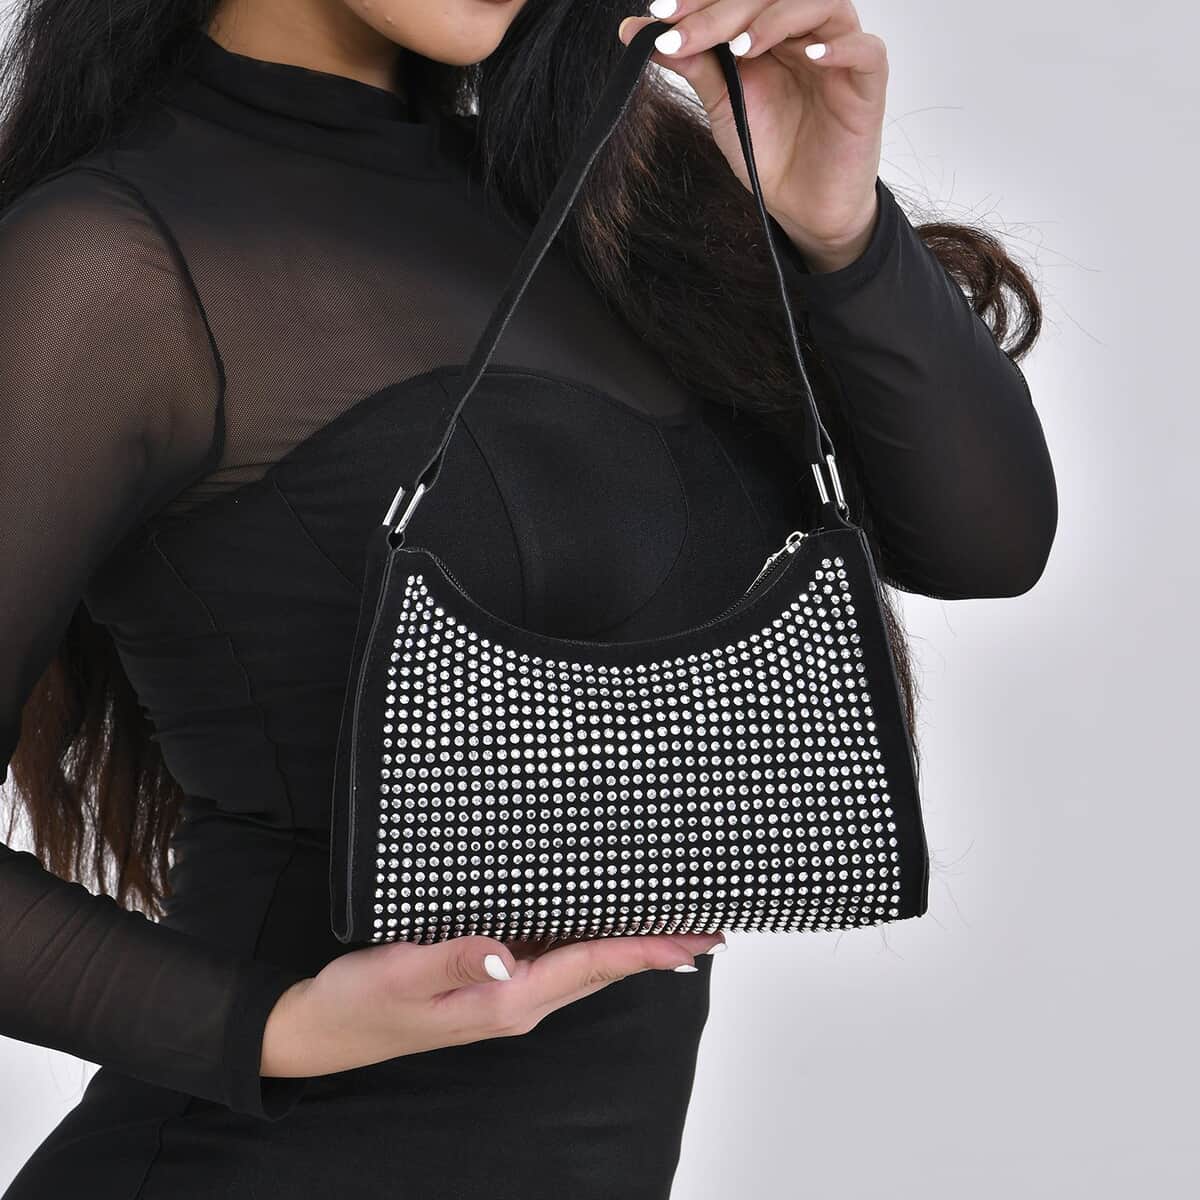 Black Faux Leather and Crystal Sling Bag (9.3"x3.6"x2.6") image number 2